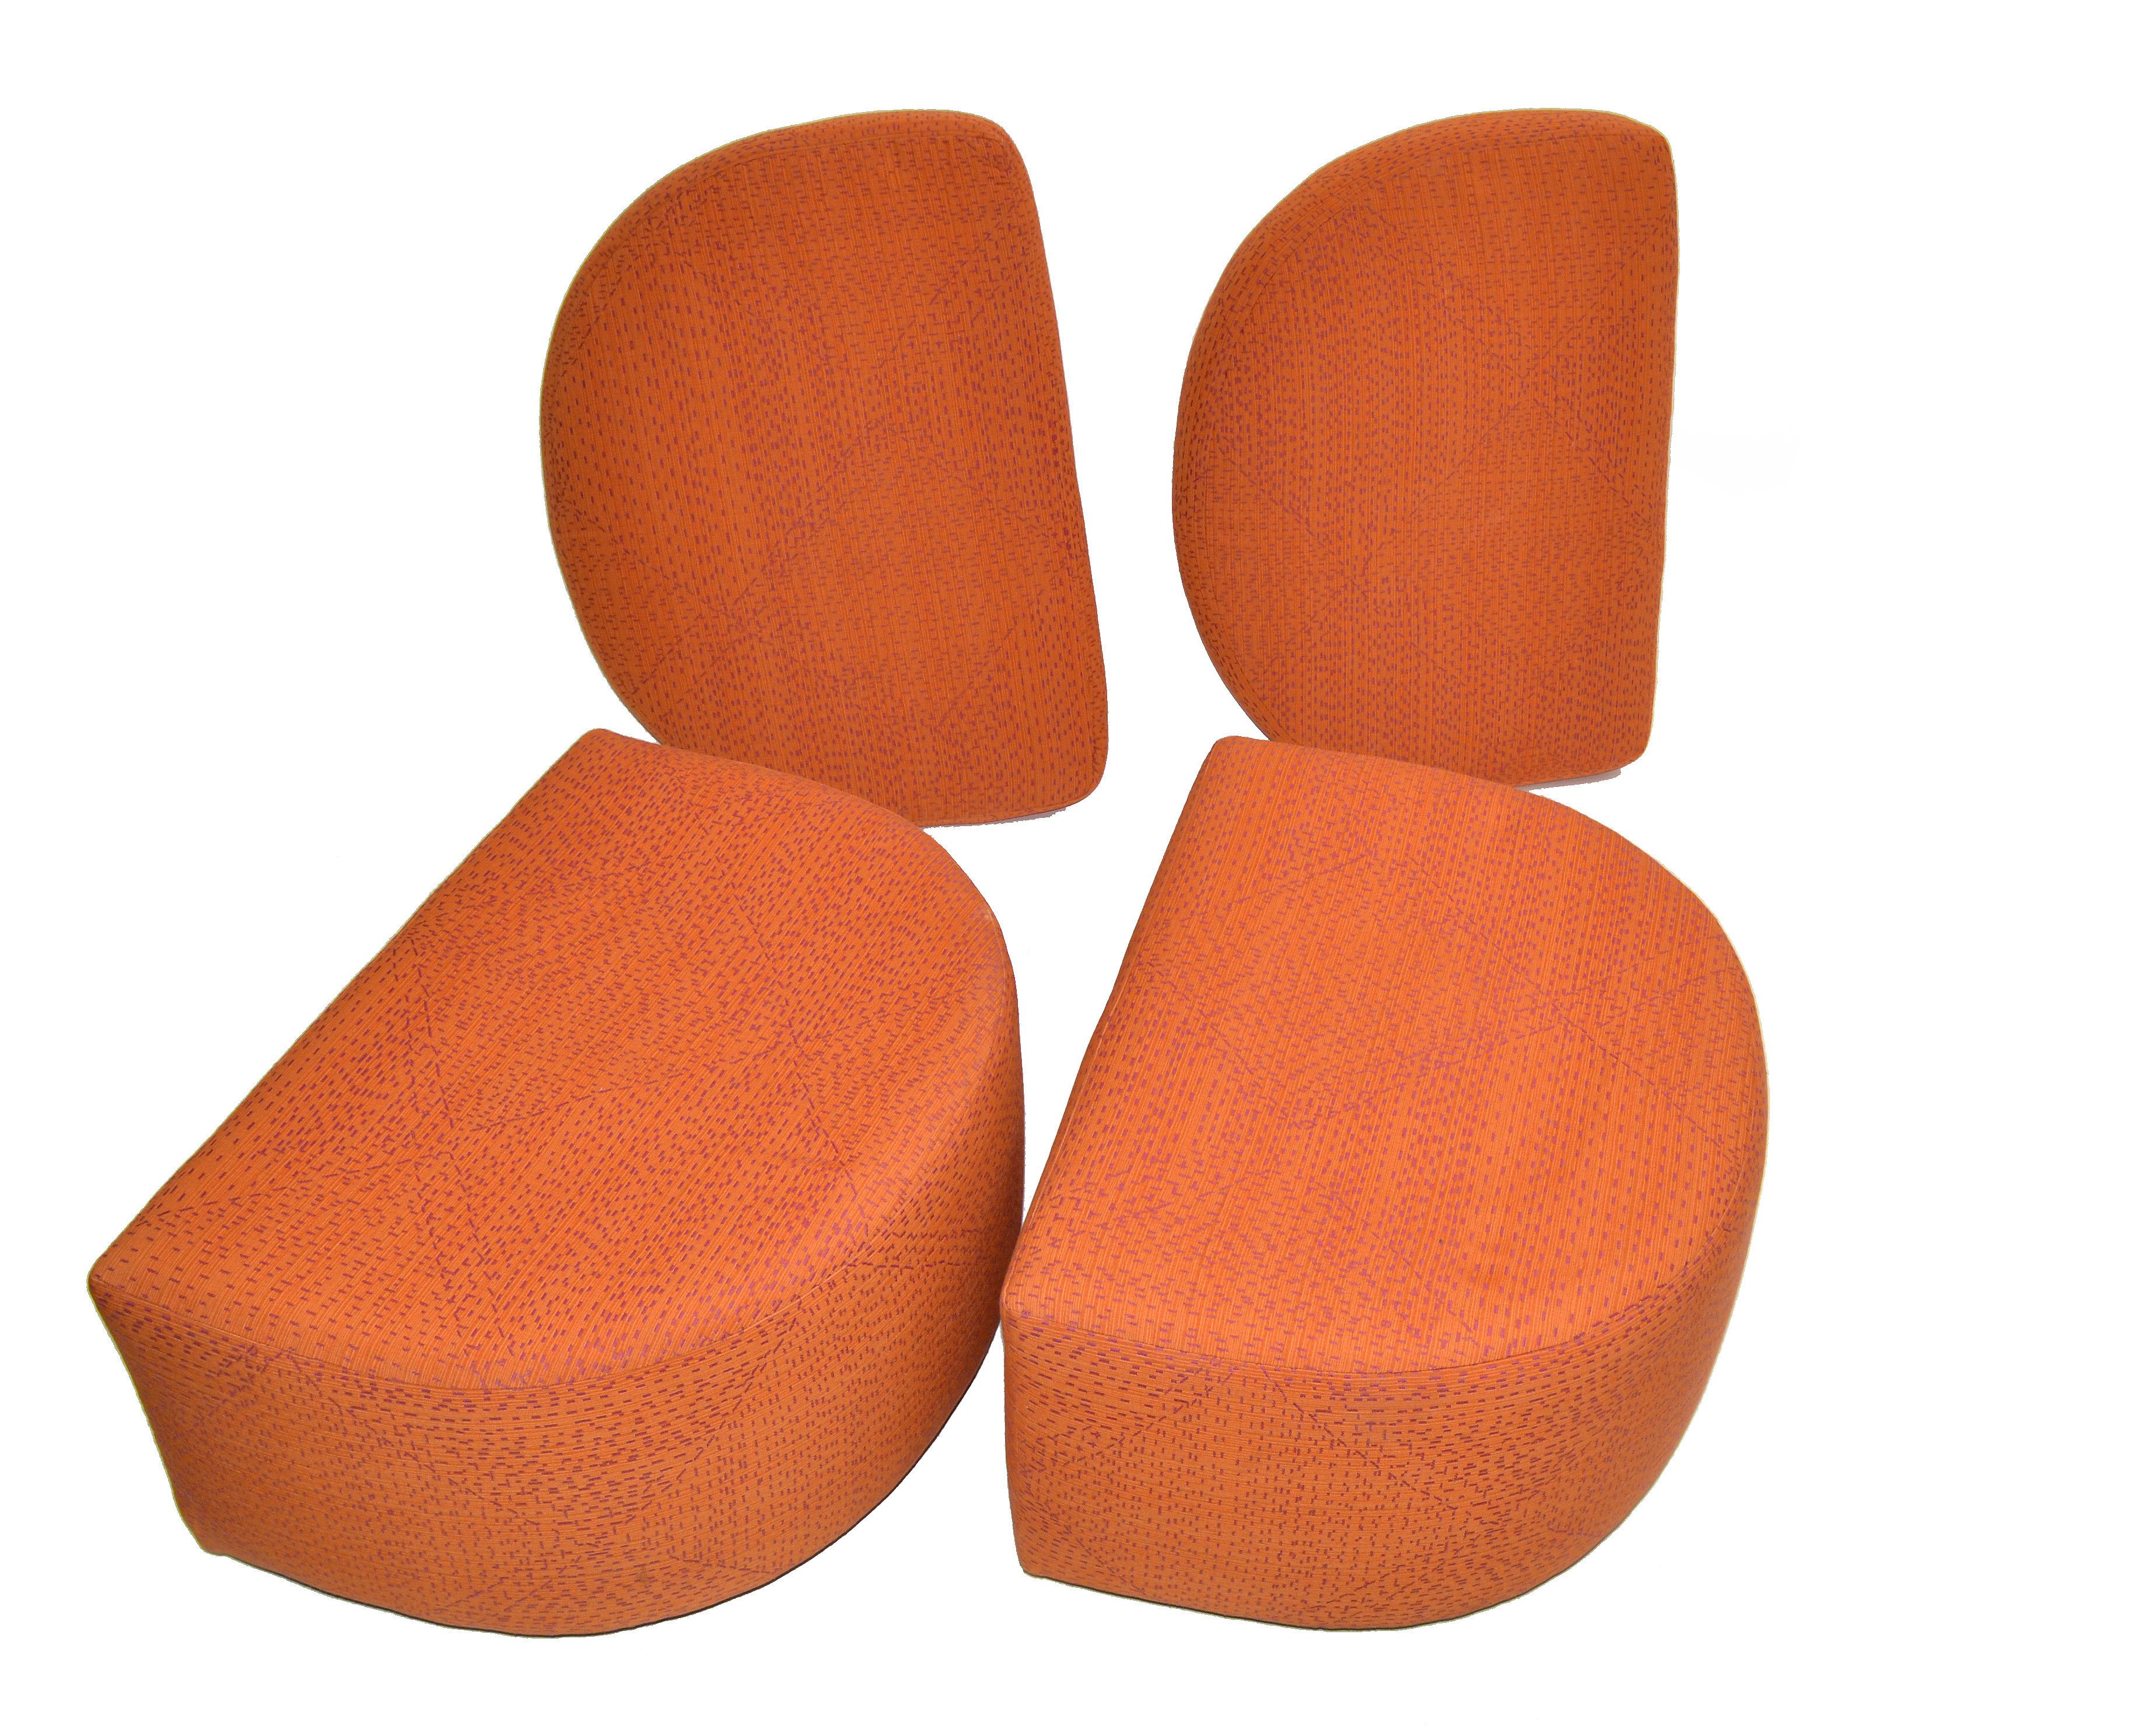 Mid-Century Modern Orange Cotton Upholstery Ottoman on Casters & Cushions - Pair For Sale 1